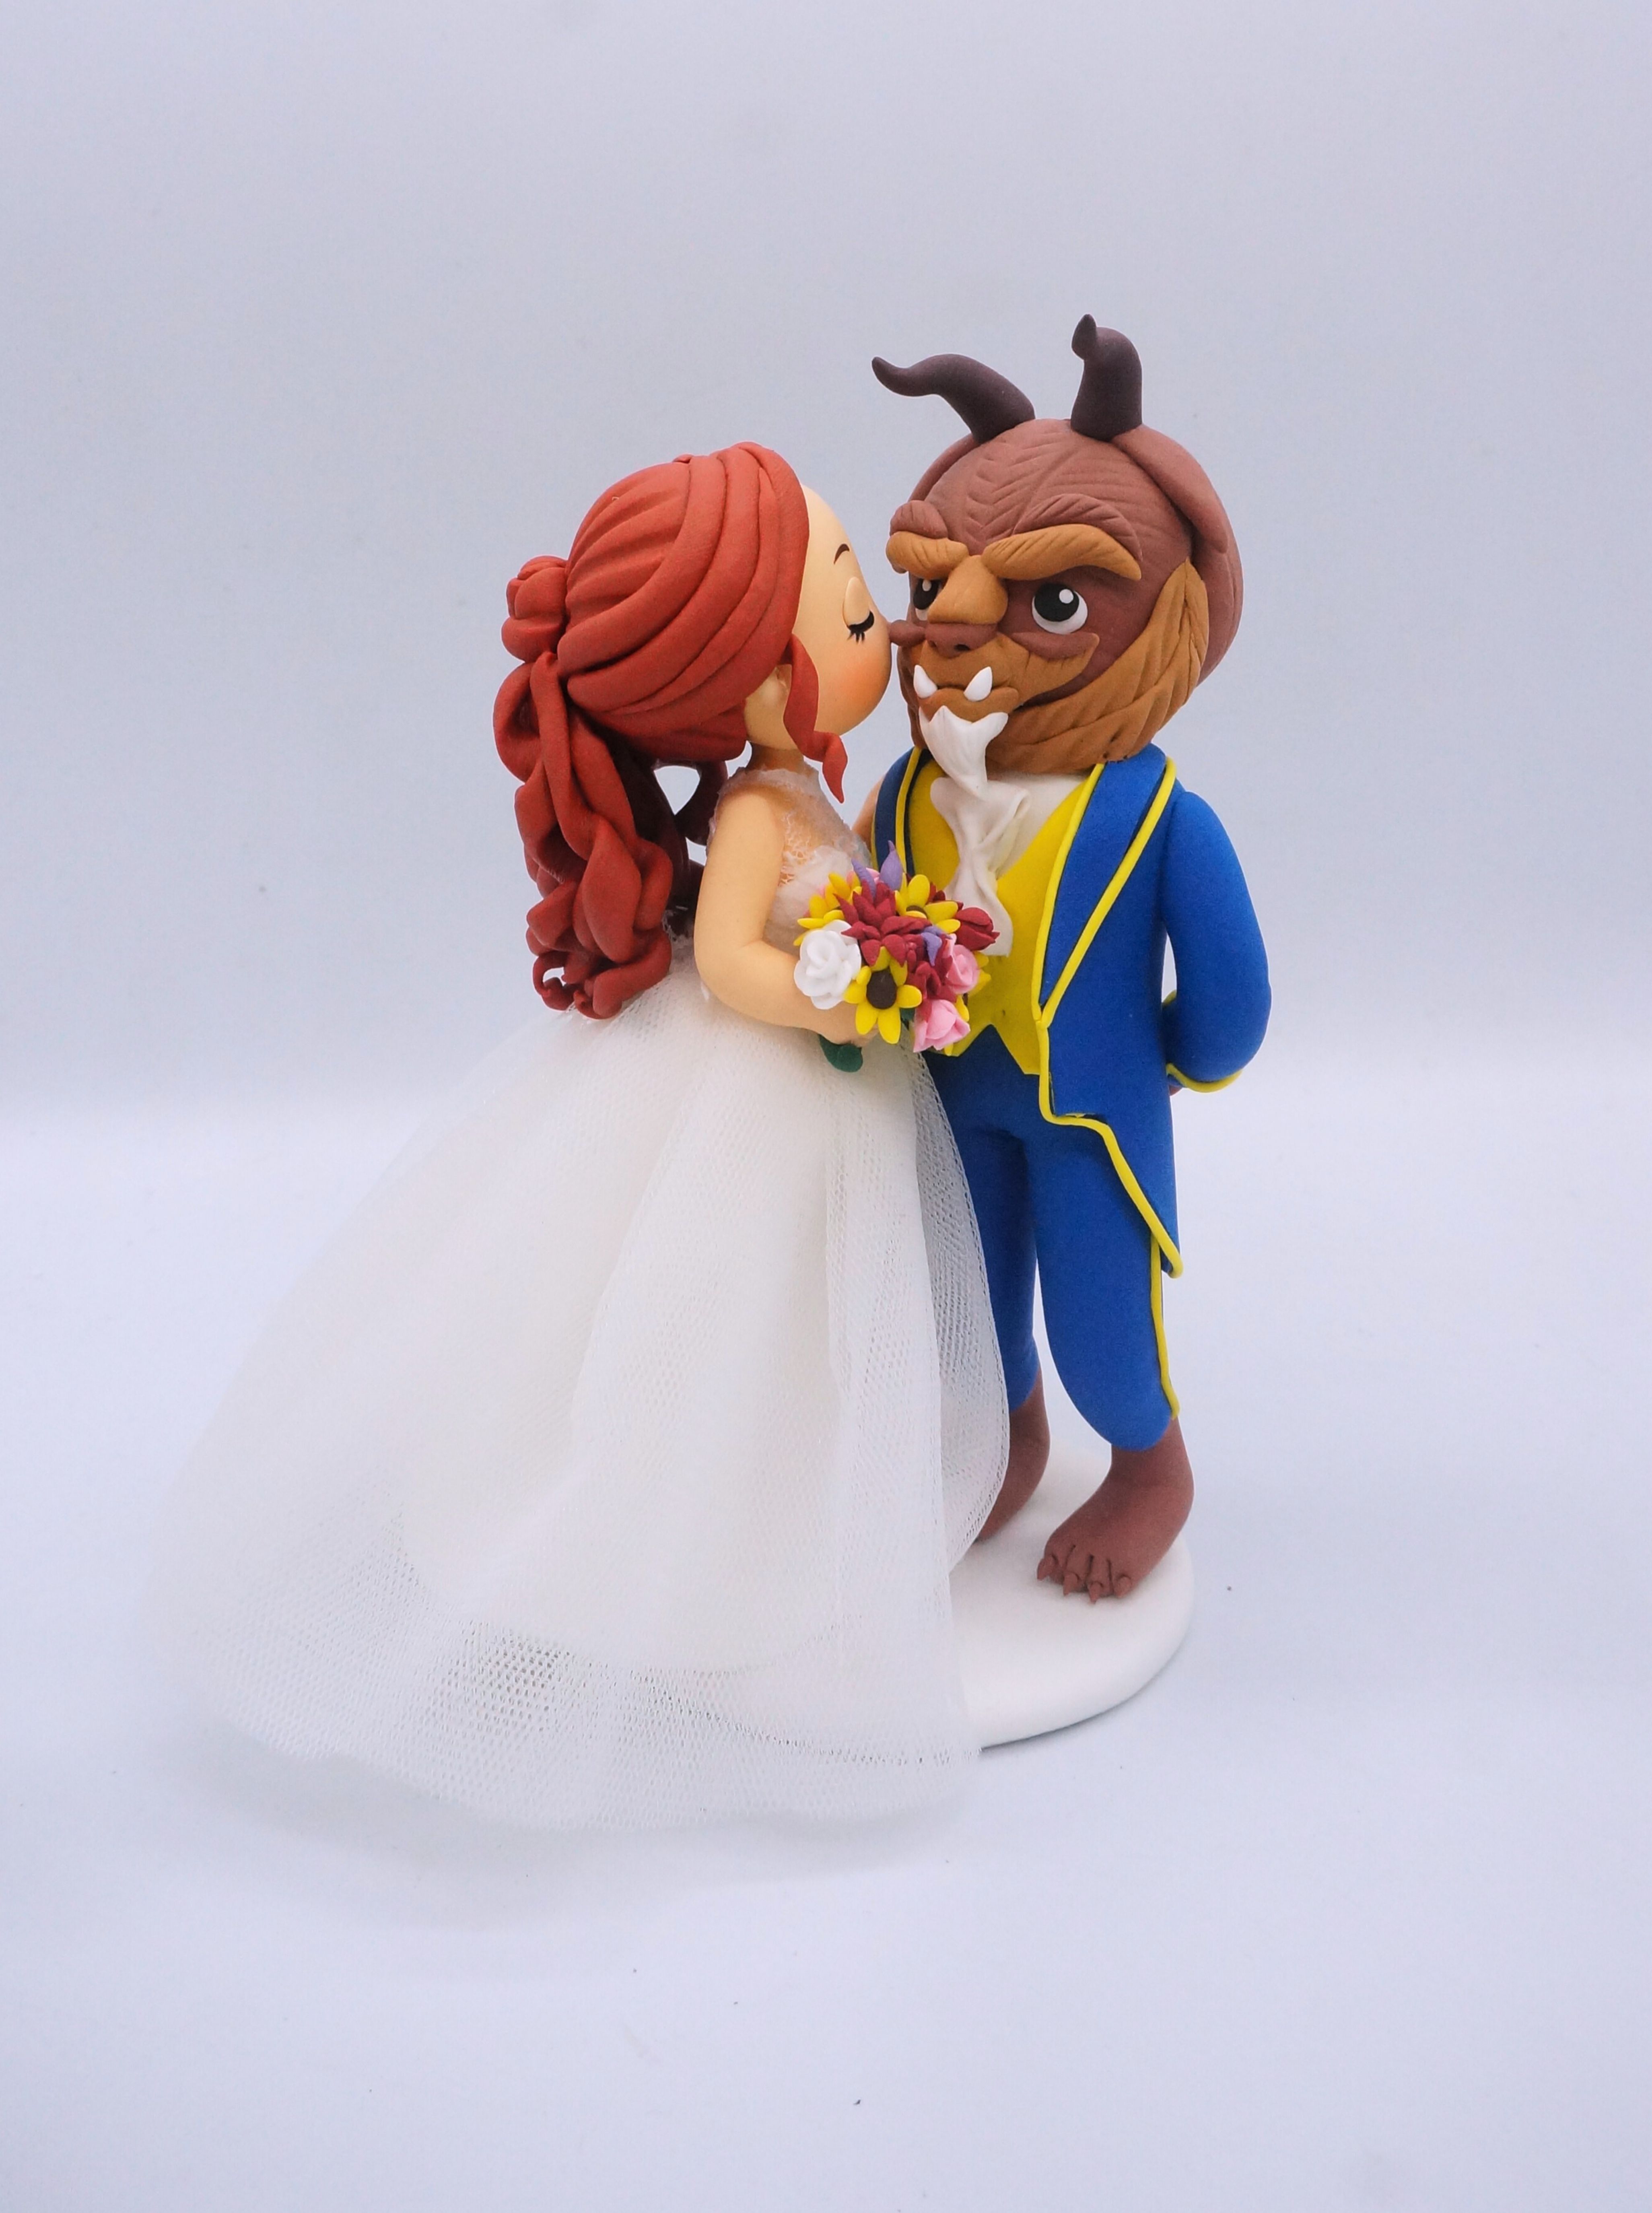 Picture of Beauty and the Beast Wedding Cake Topper, Beautiful Bride & the Beast Groom Topper, Disney Princess Cake Topper